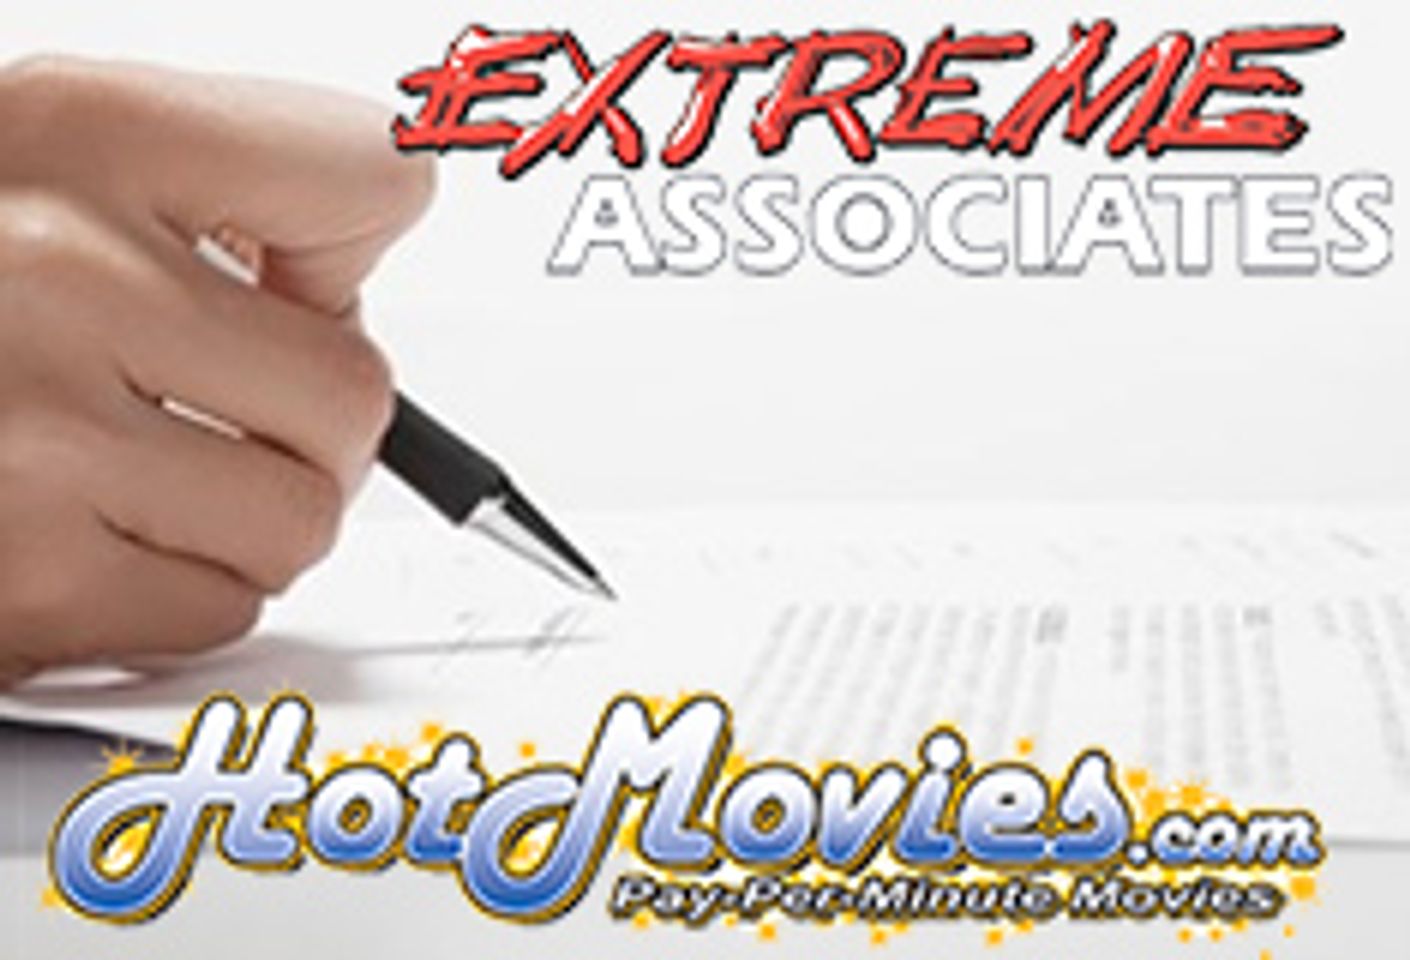 Extreme Goes VOD Only, Partners with HotMovies.com